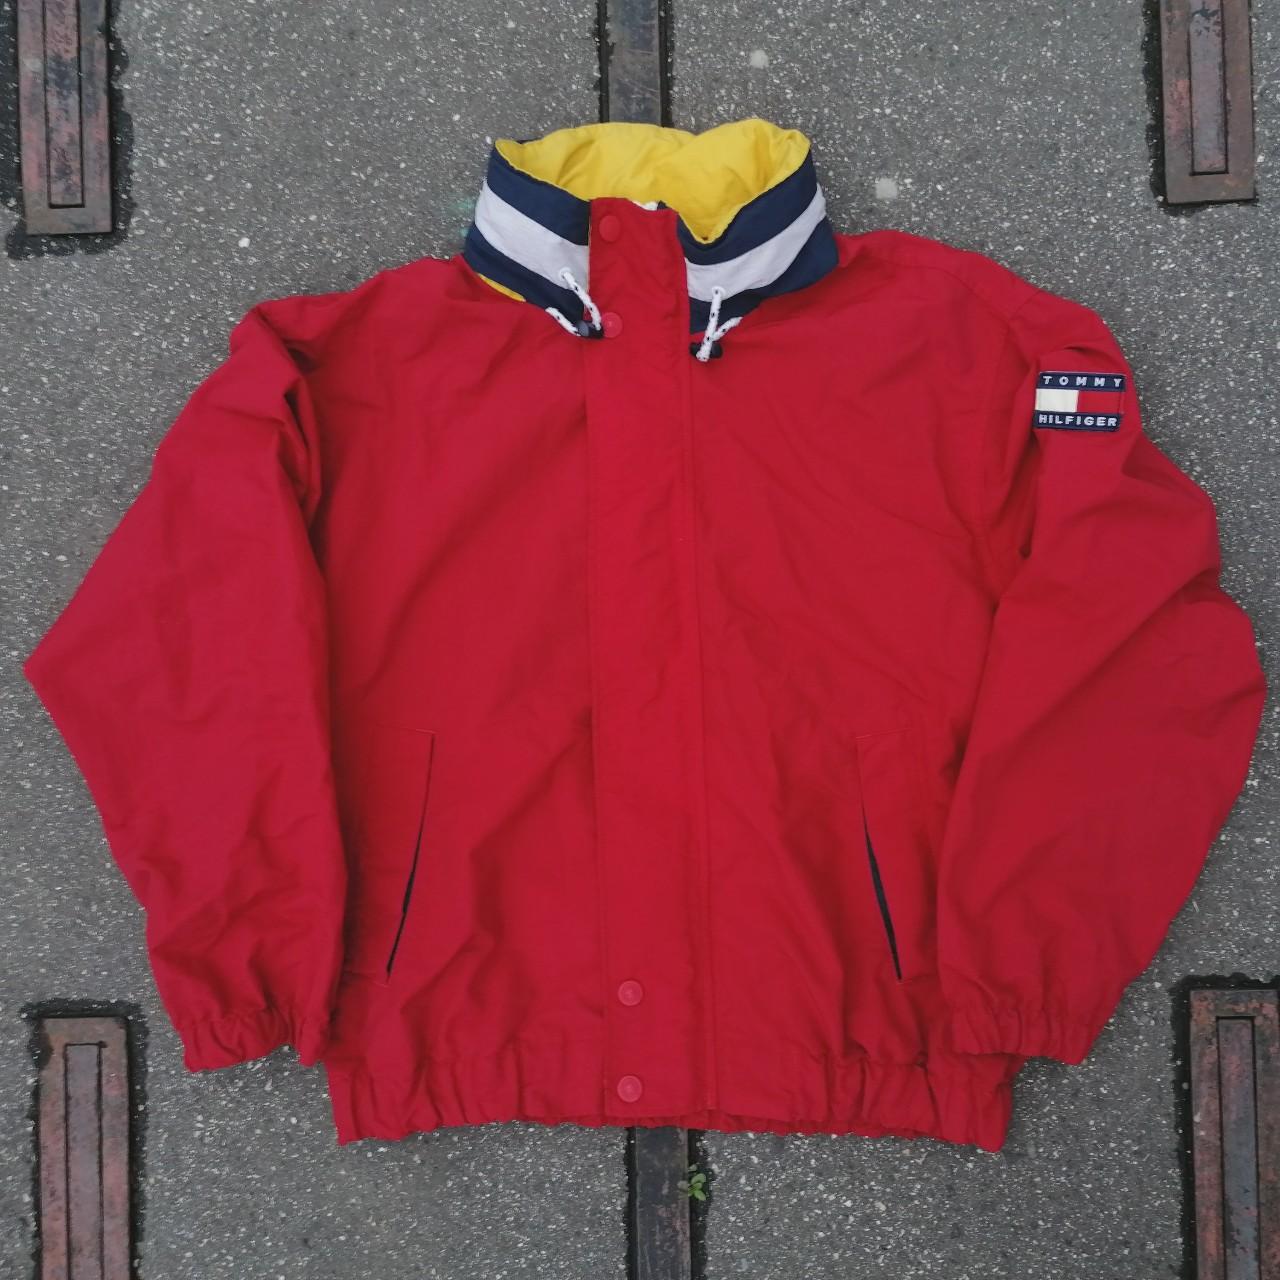 real or fake tommy hilfiger jacket - purchased off of depop but